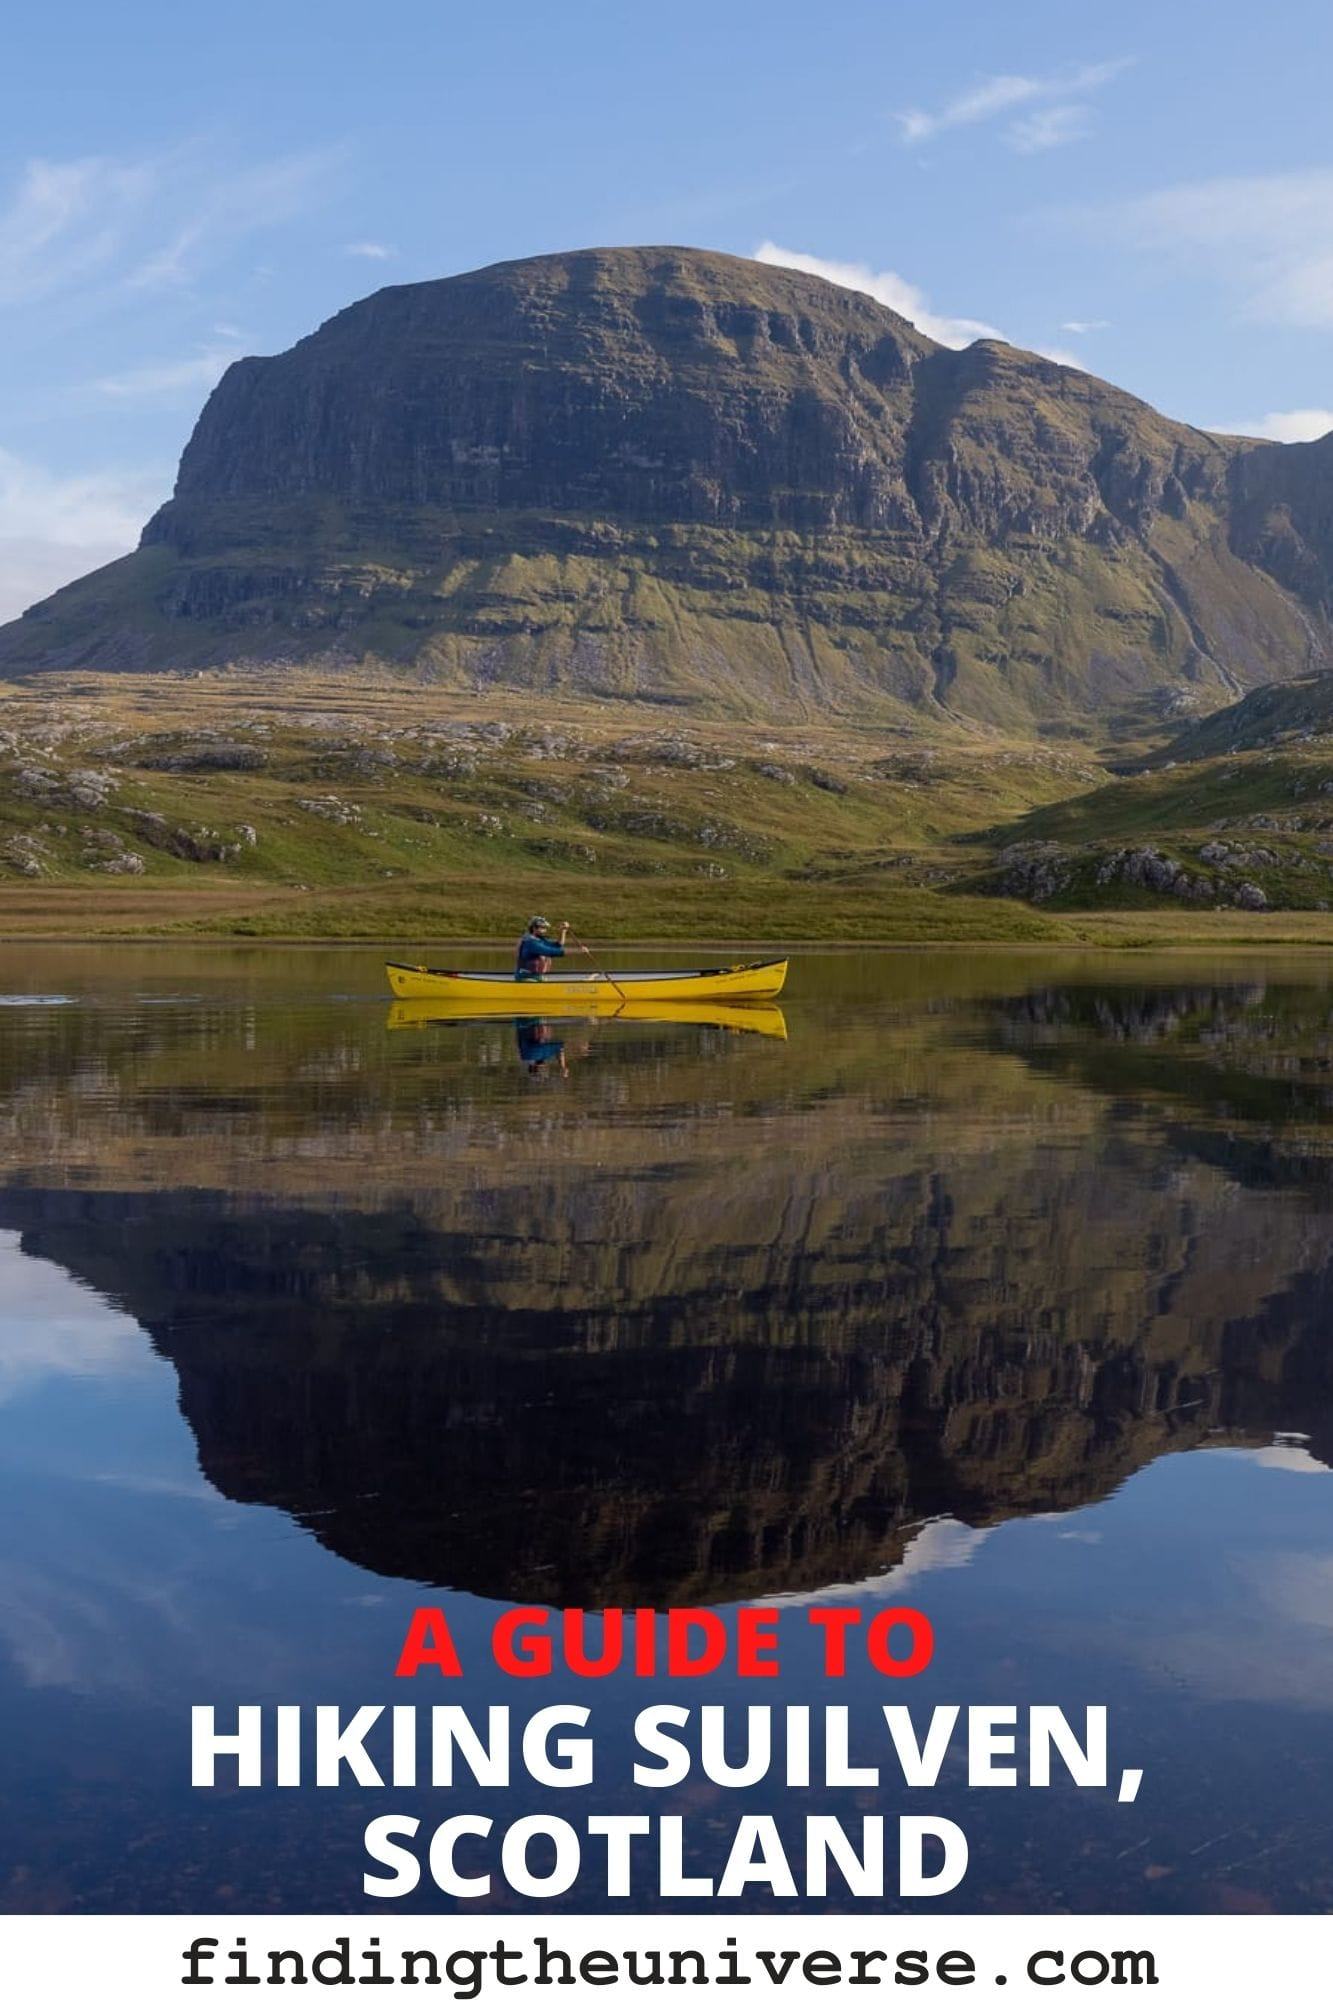 A guide to hiking Suilven in Scotland, including my personal experience hiking Suilven with Hamlet Mountaineering.